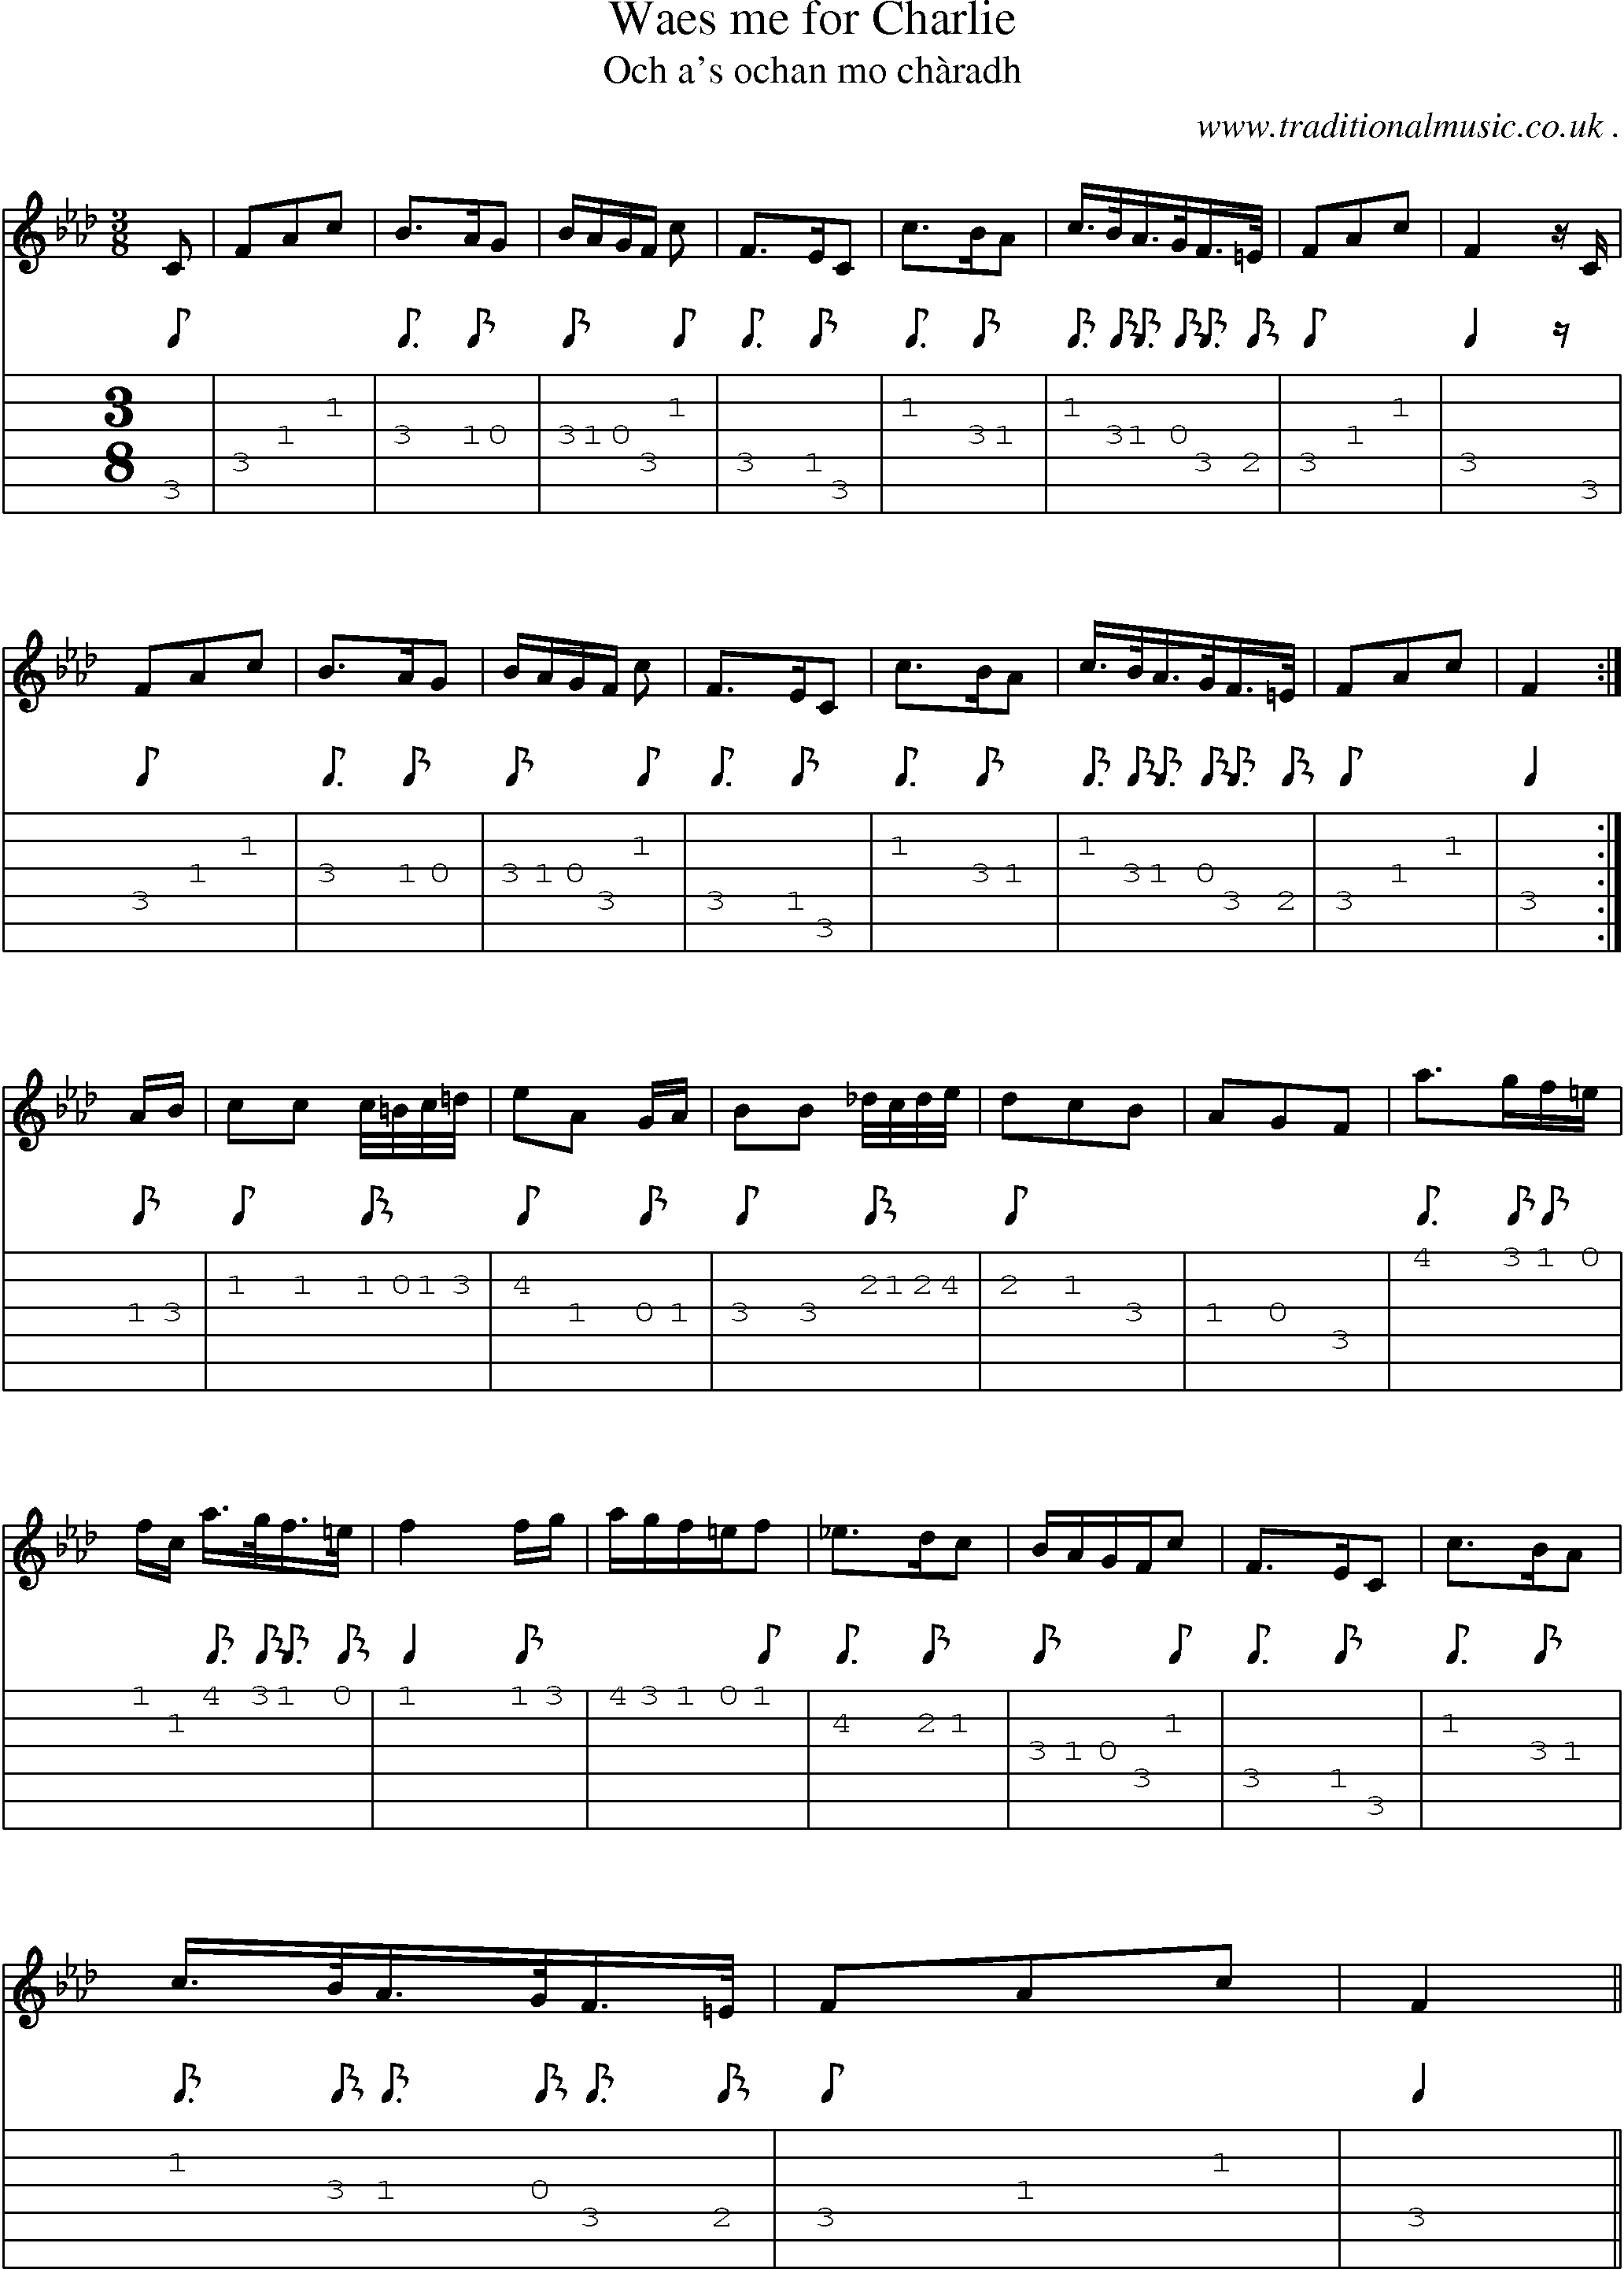 Sheet-music  score, Chords and Guitar Tabs for Waes Me For Charlie